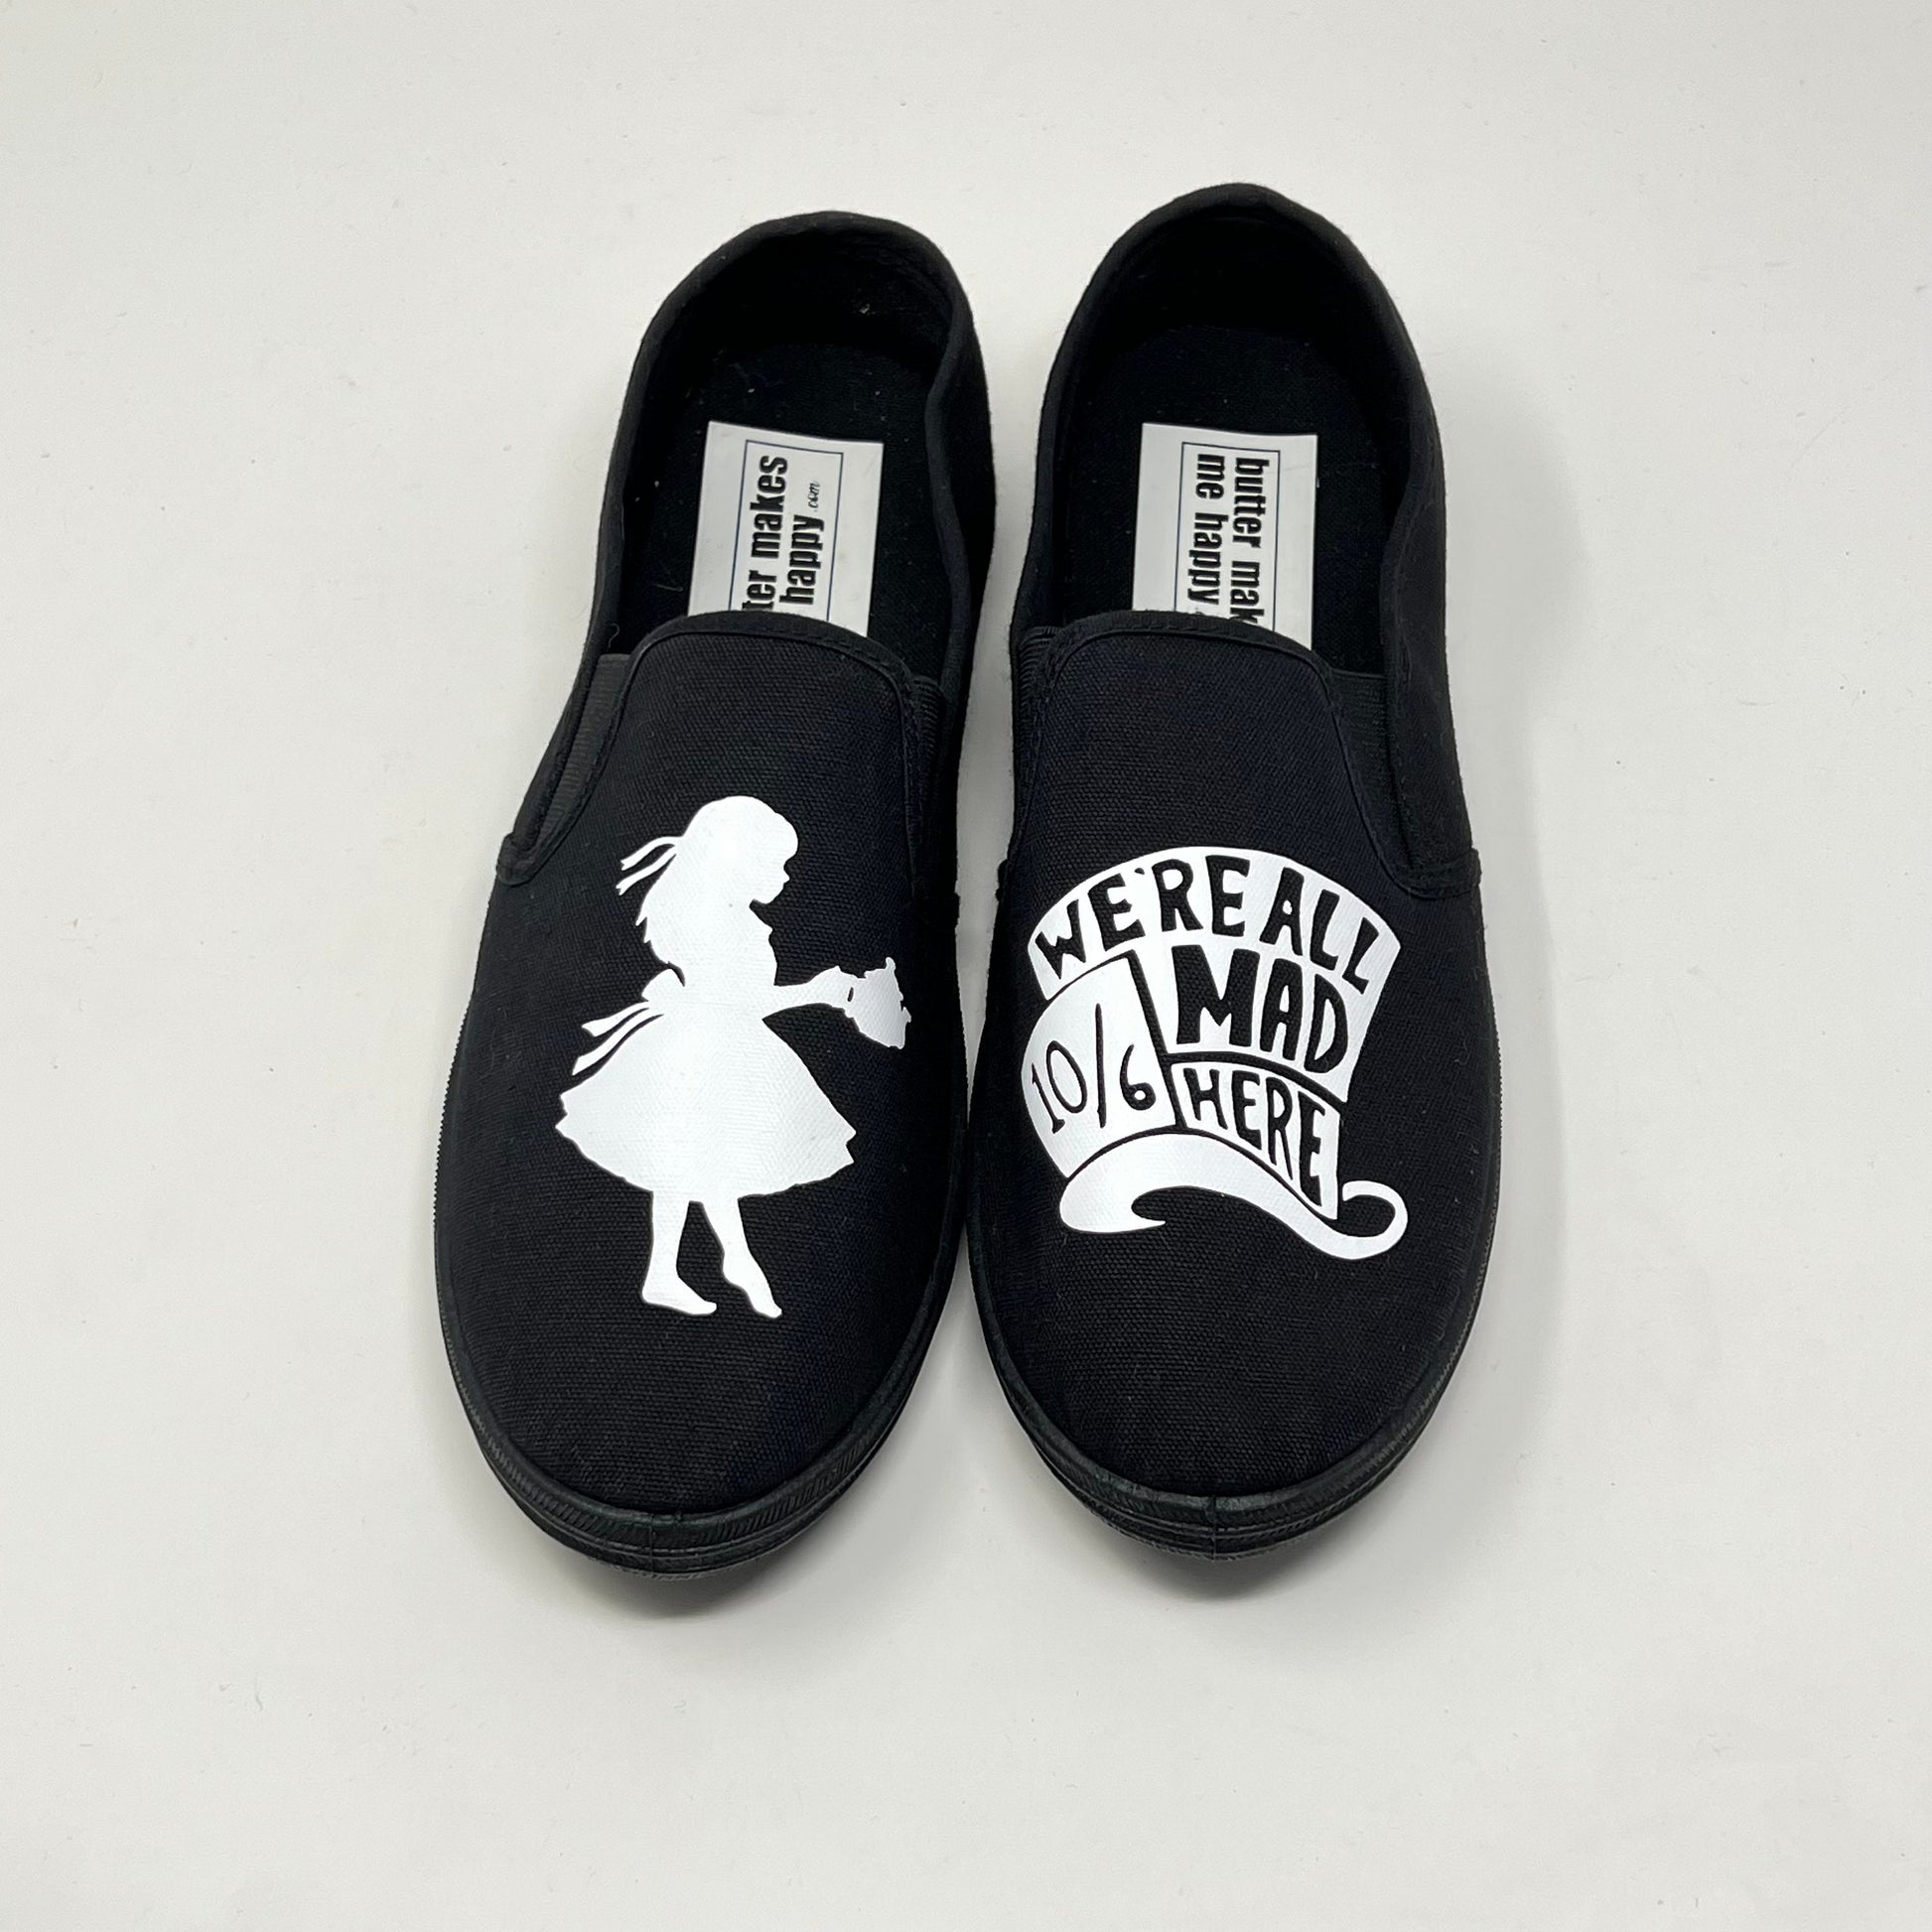 Alice in Wonderland We're All Mad Here Shoes [READY TO SHIP]-Misc-ButterMakesMeHappy